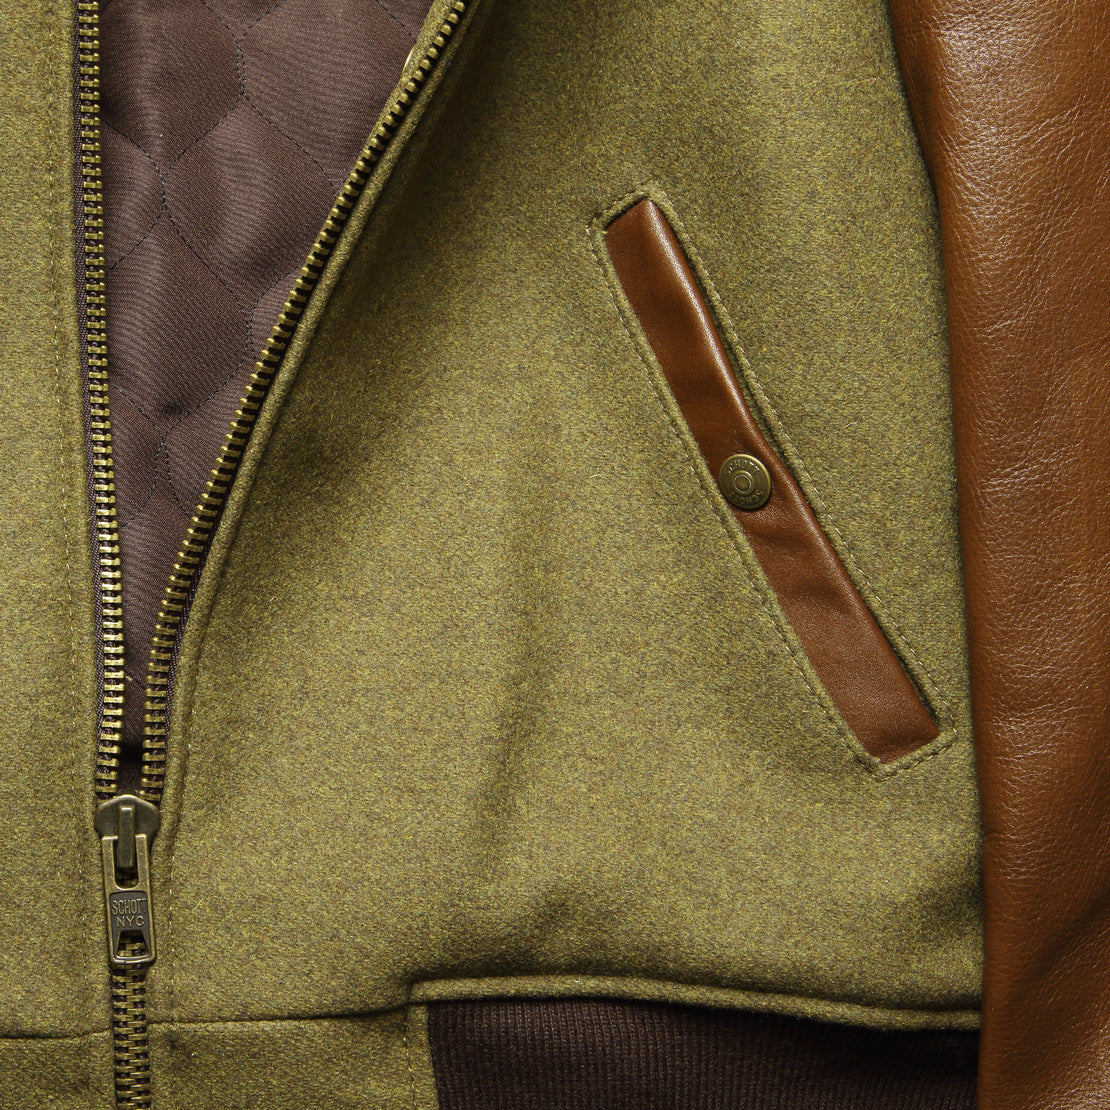 B-15 Wool Jacket - Olive - Schott - STAG Provisions - Outerwear - Coat / Jacket